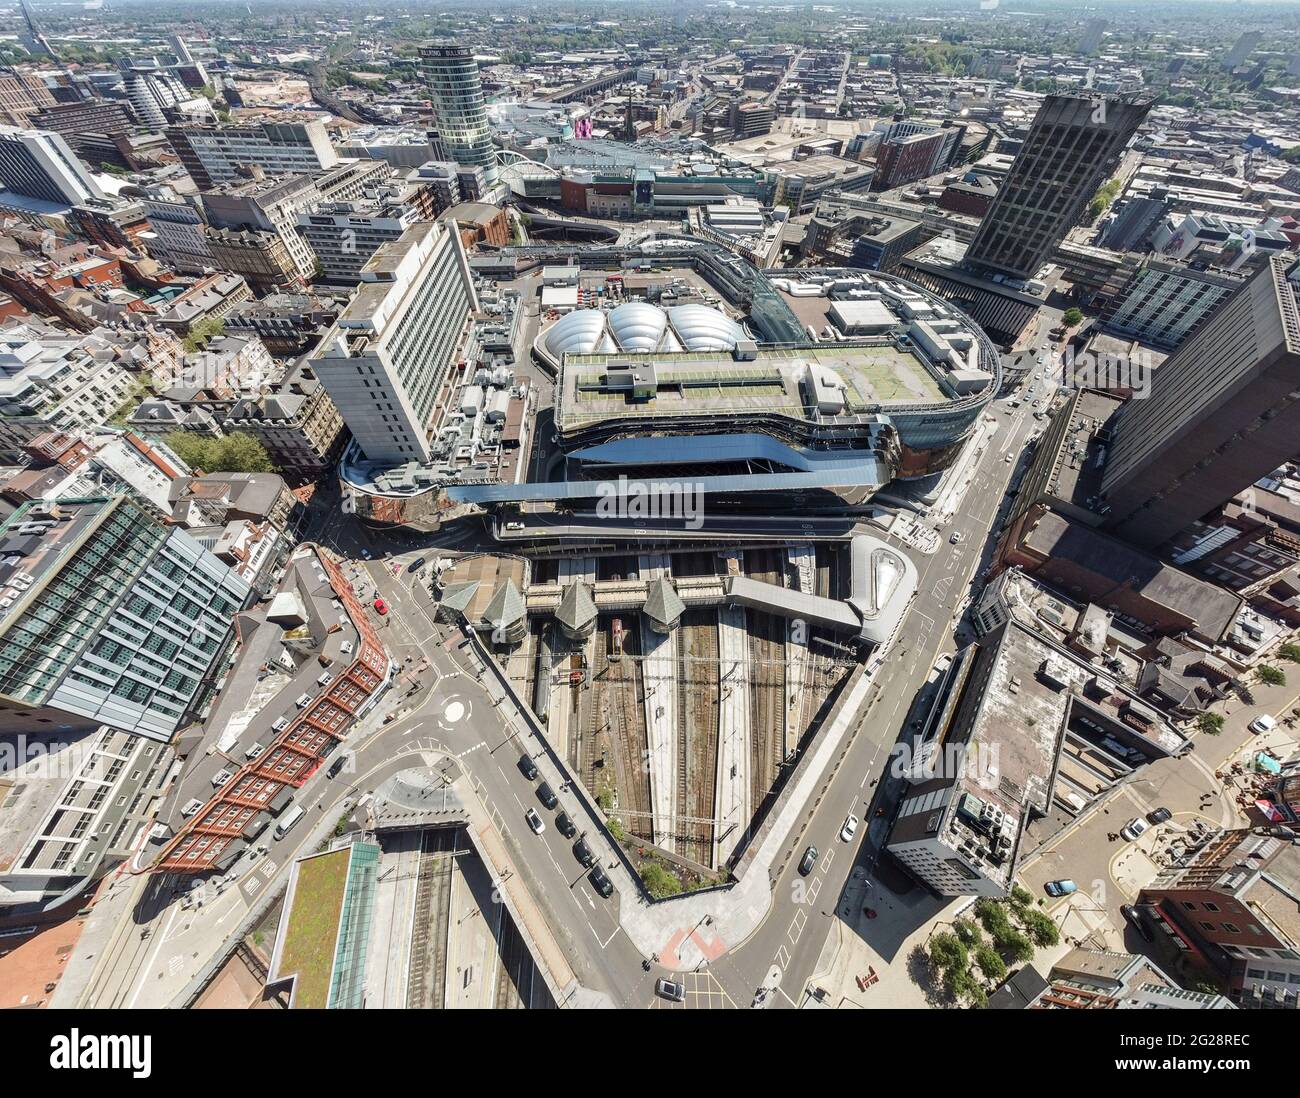 Birmingham New Street Grand Central Station England Aerial view of city centre with crossroads train station. Big transport hub trains at platform Stock Photo